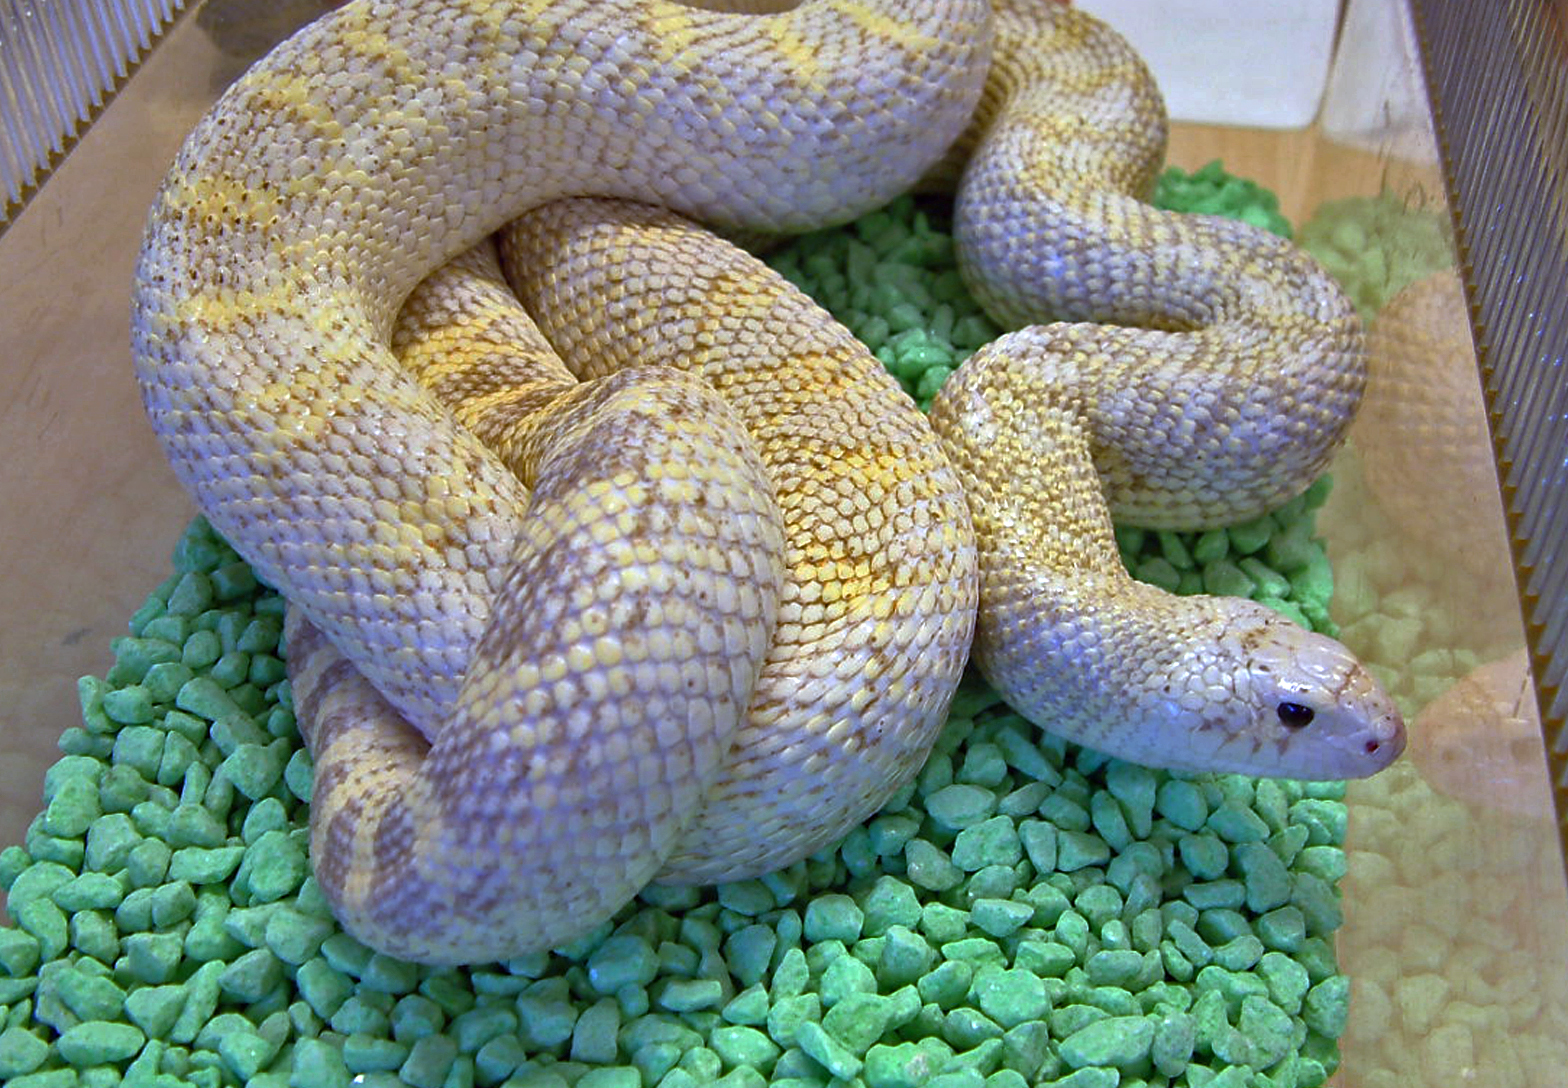 pituophis catenifer sayi ghost ivory 1